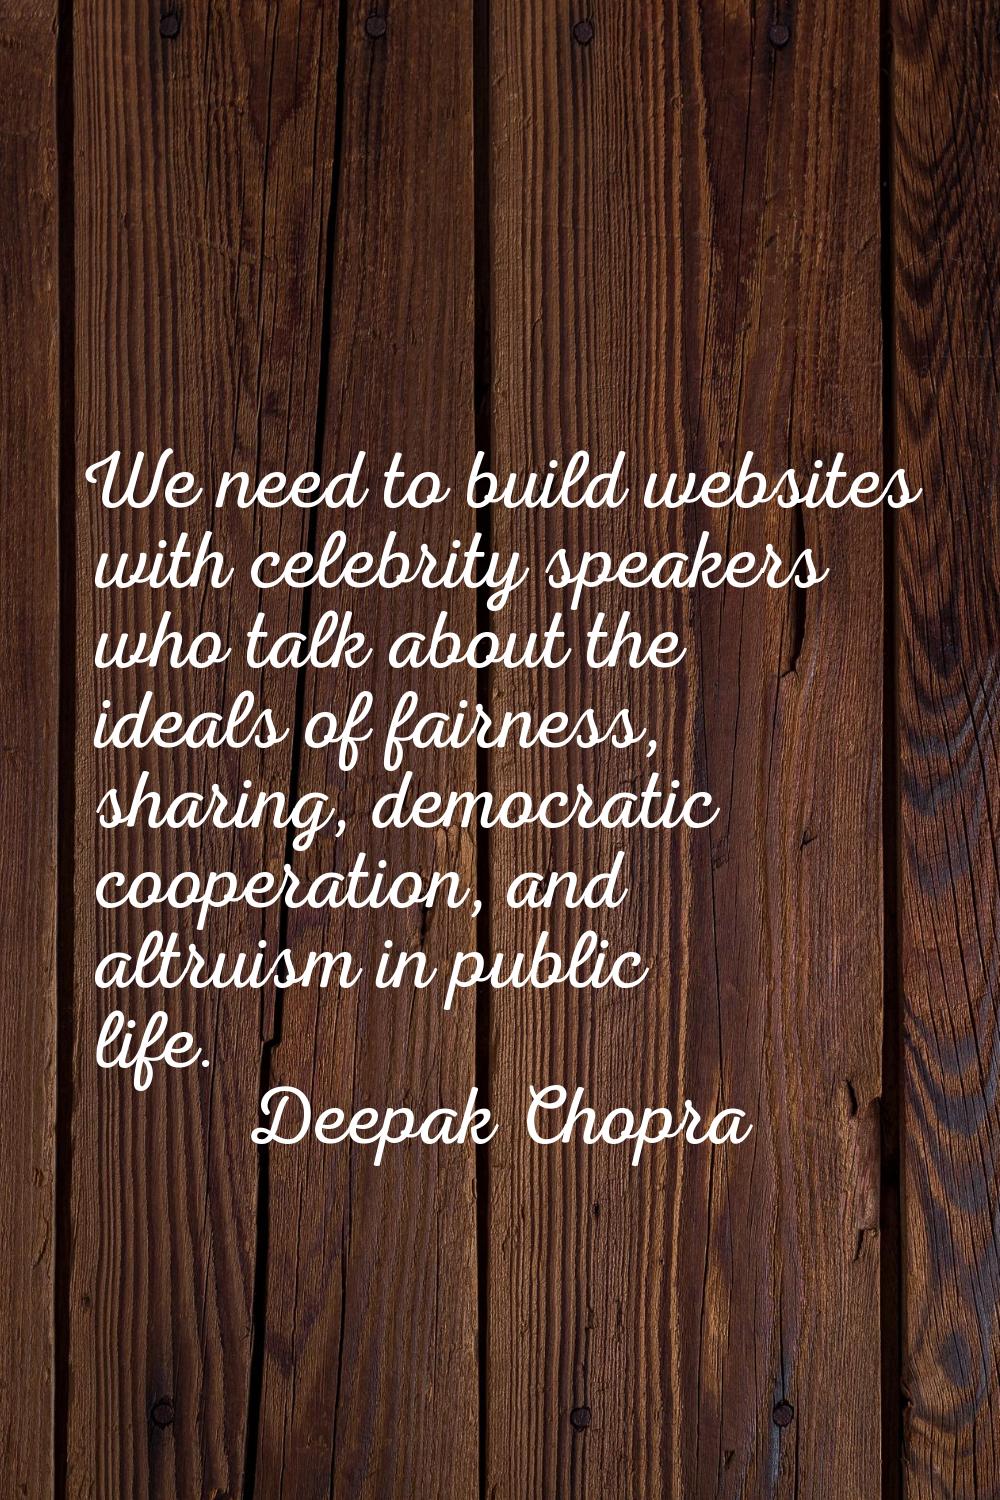 We need to build websites with celebrity speakers who talk about the ideals of fairness, sharing, d